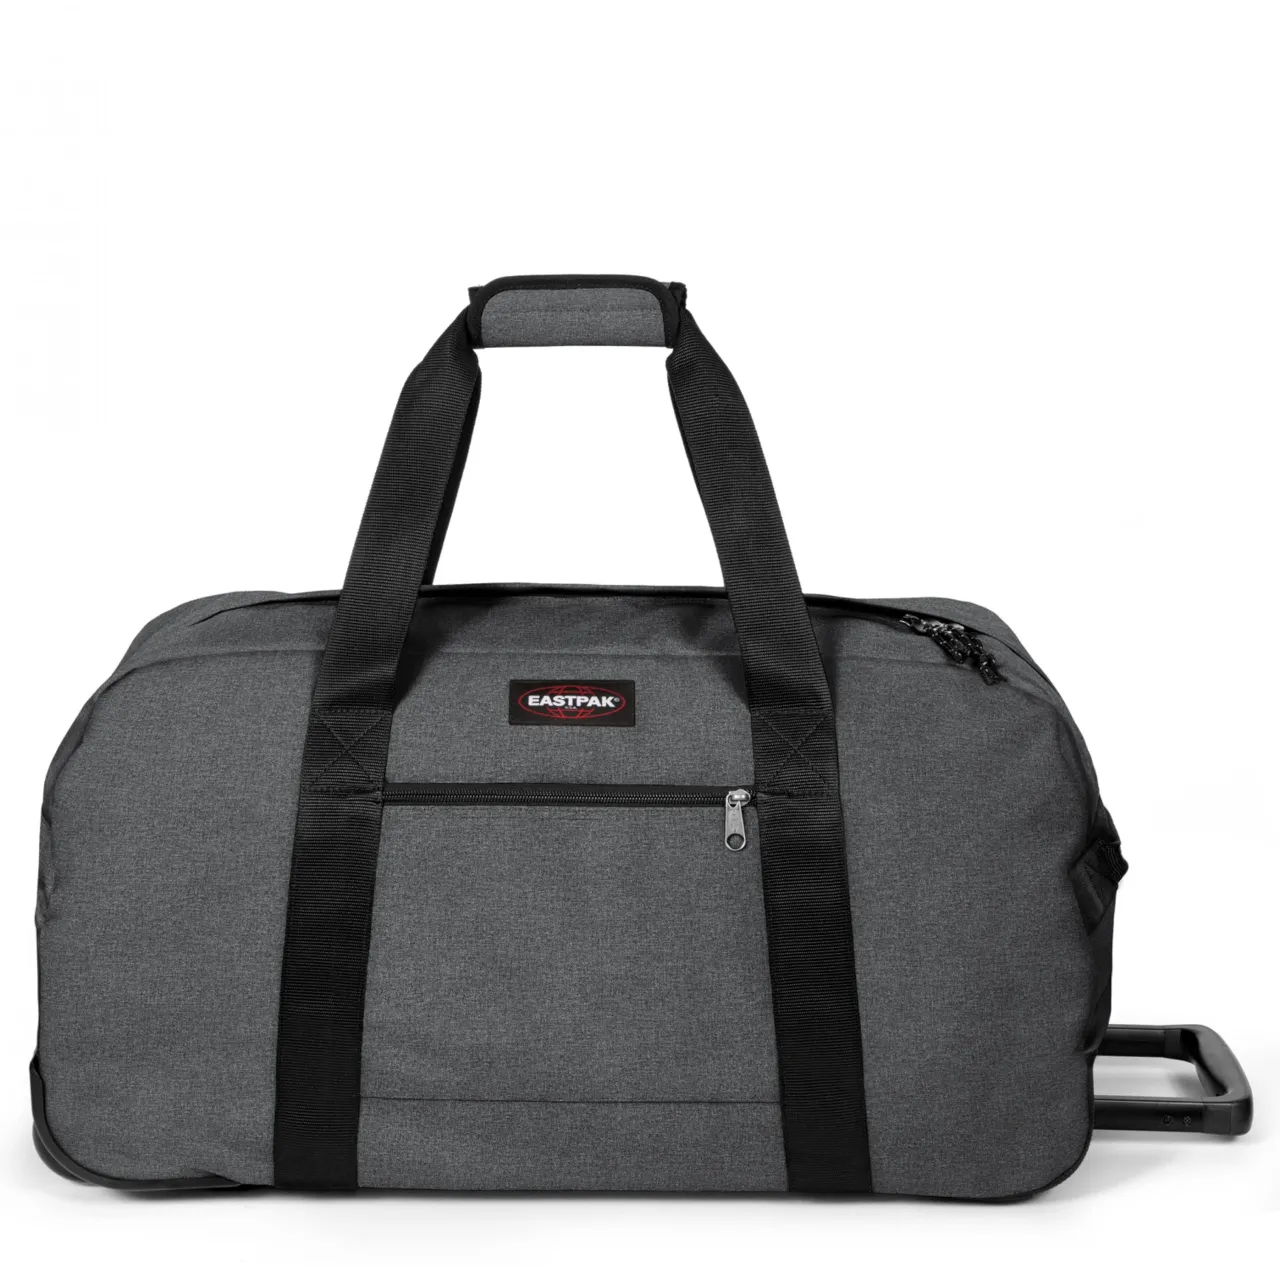 EASTPAK - CONTAINER 65+ - Travel Duffle